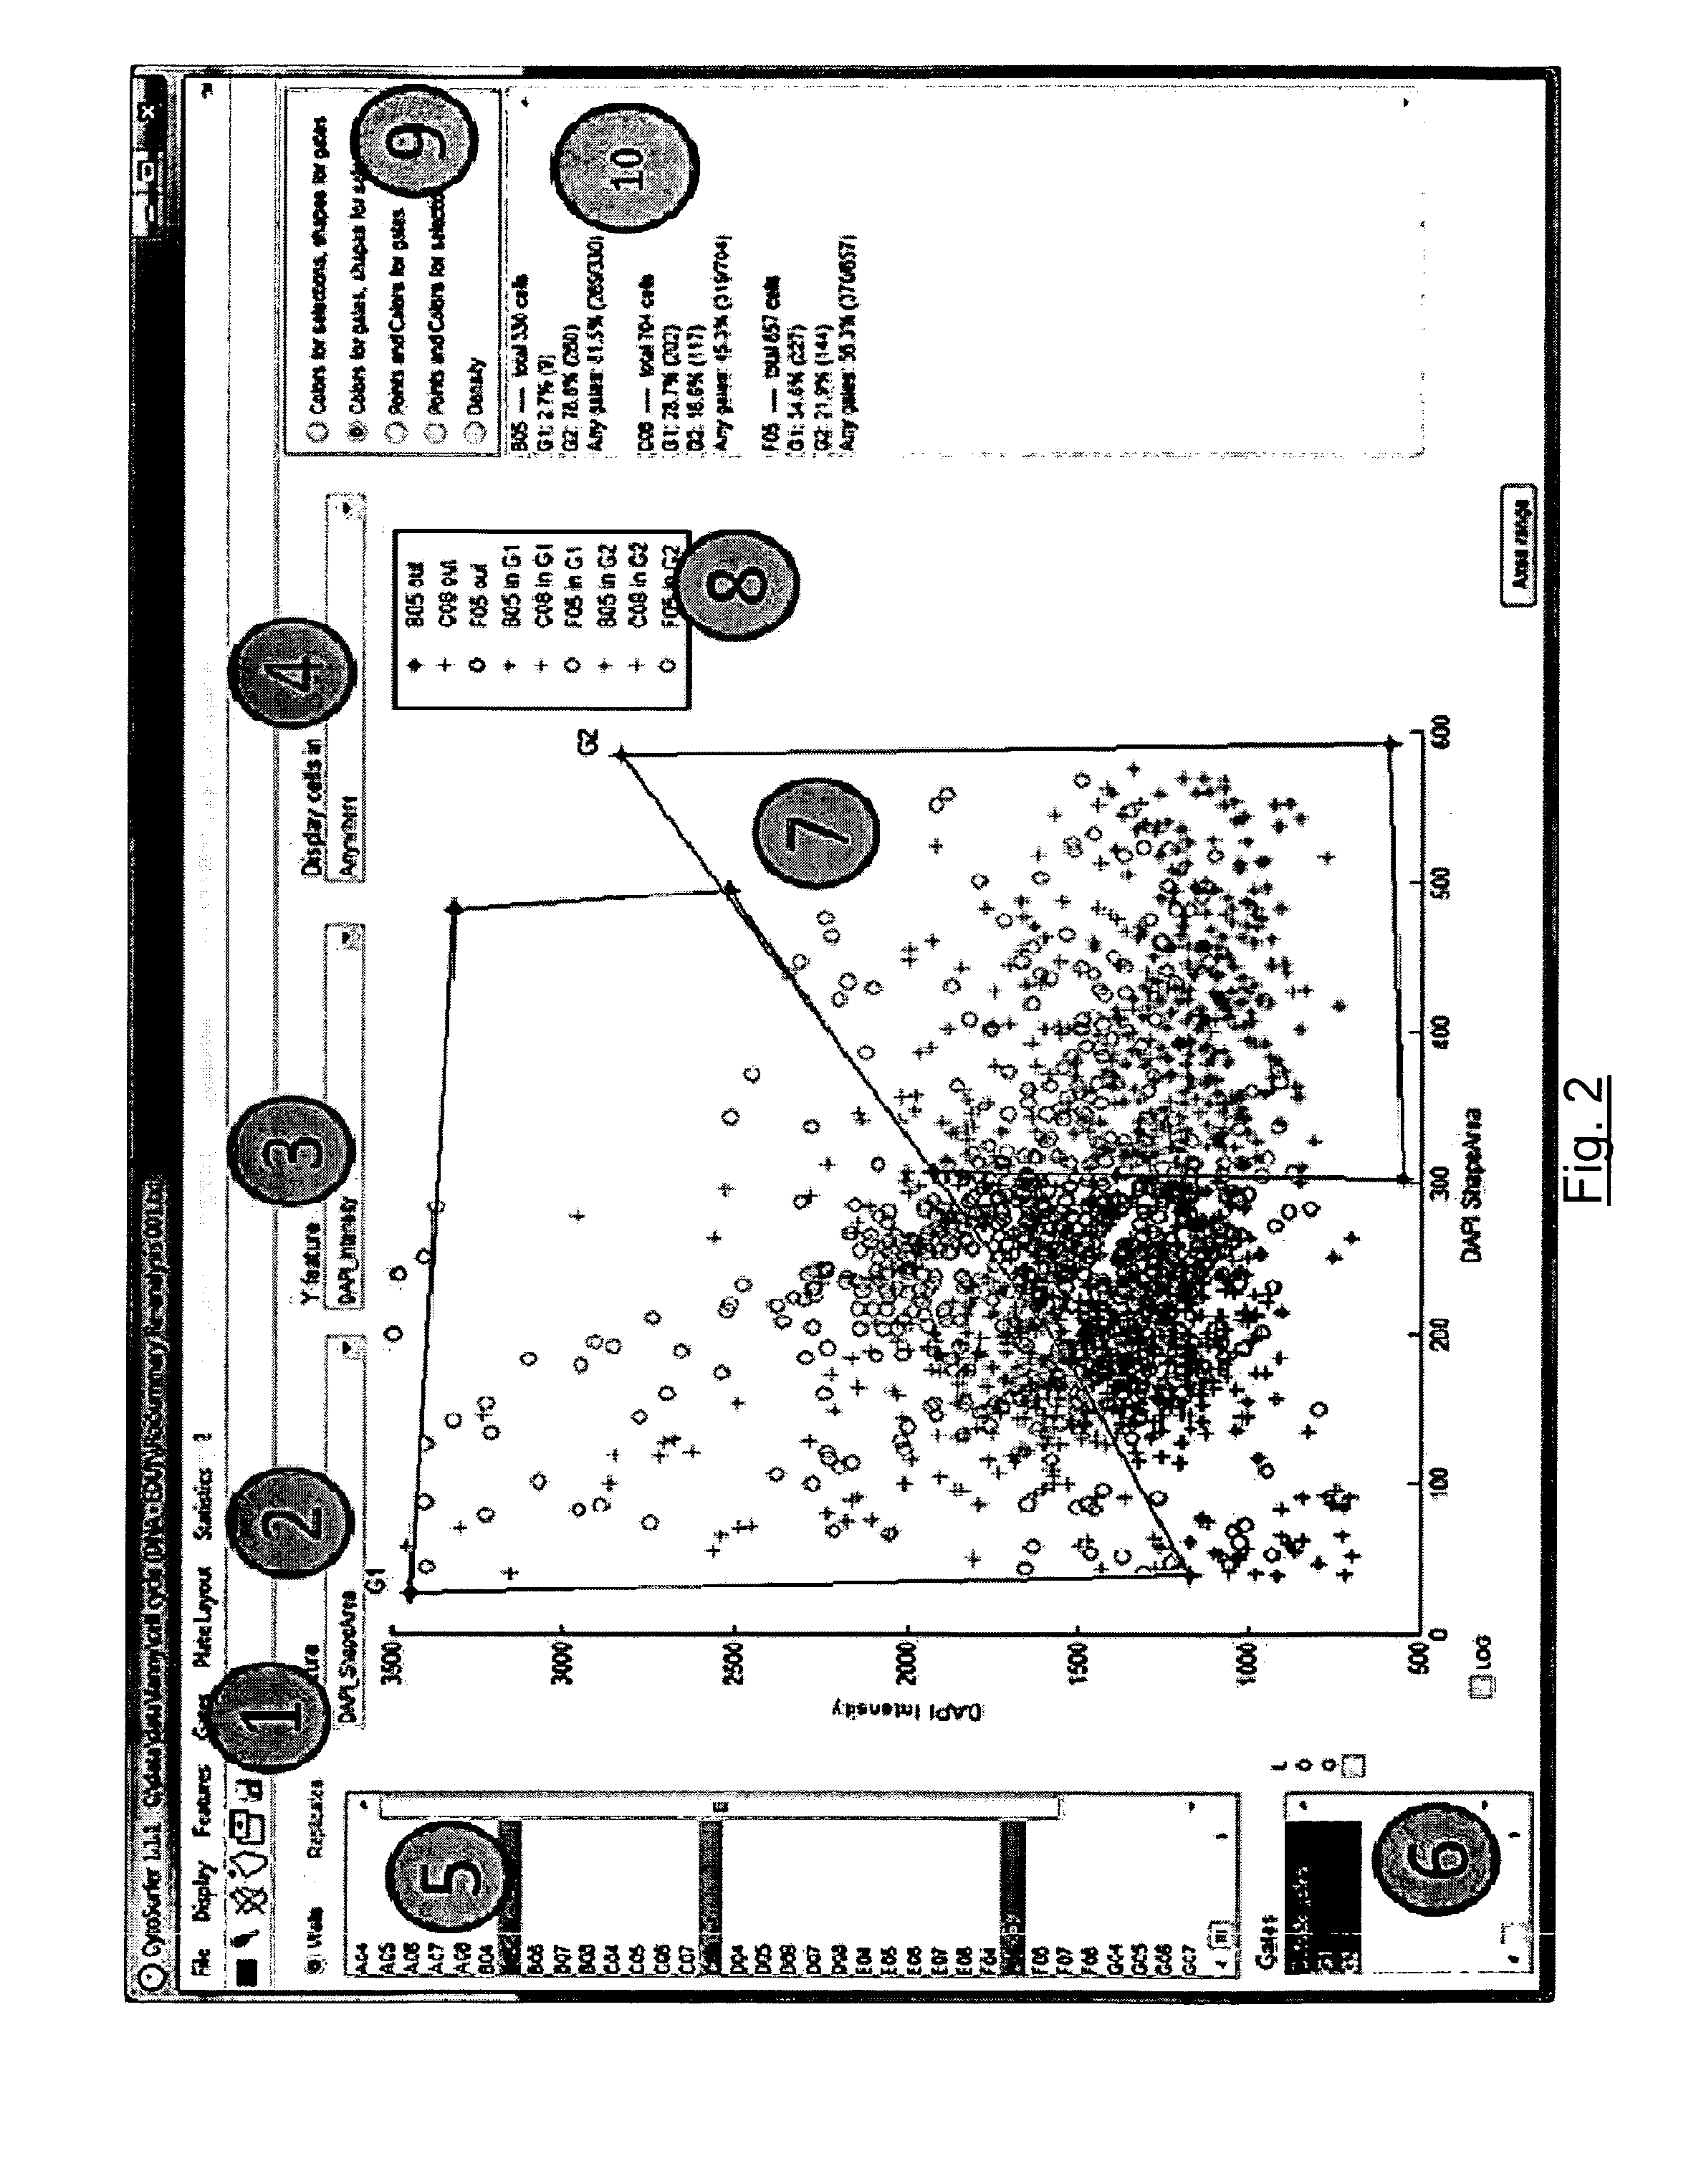 System and method to visualize and analyze data from image-based cellular assays or high content screening